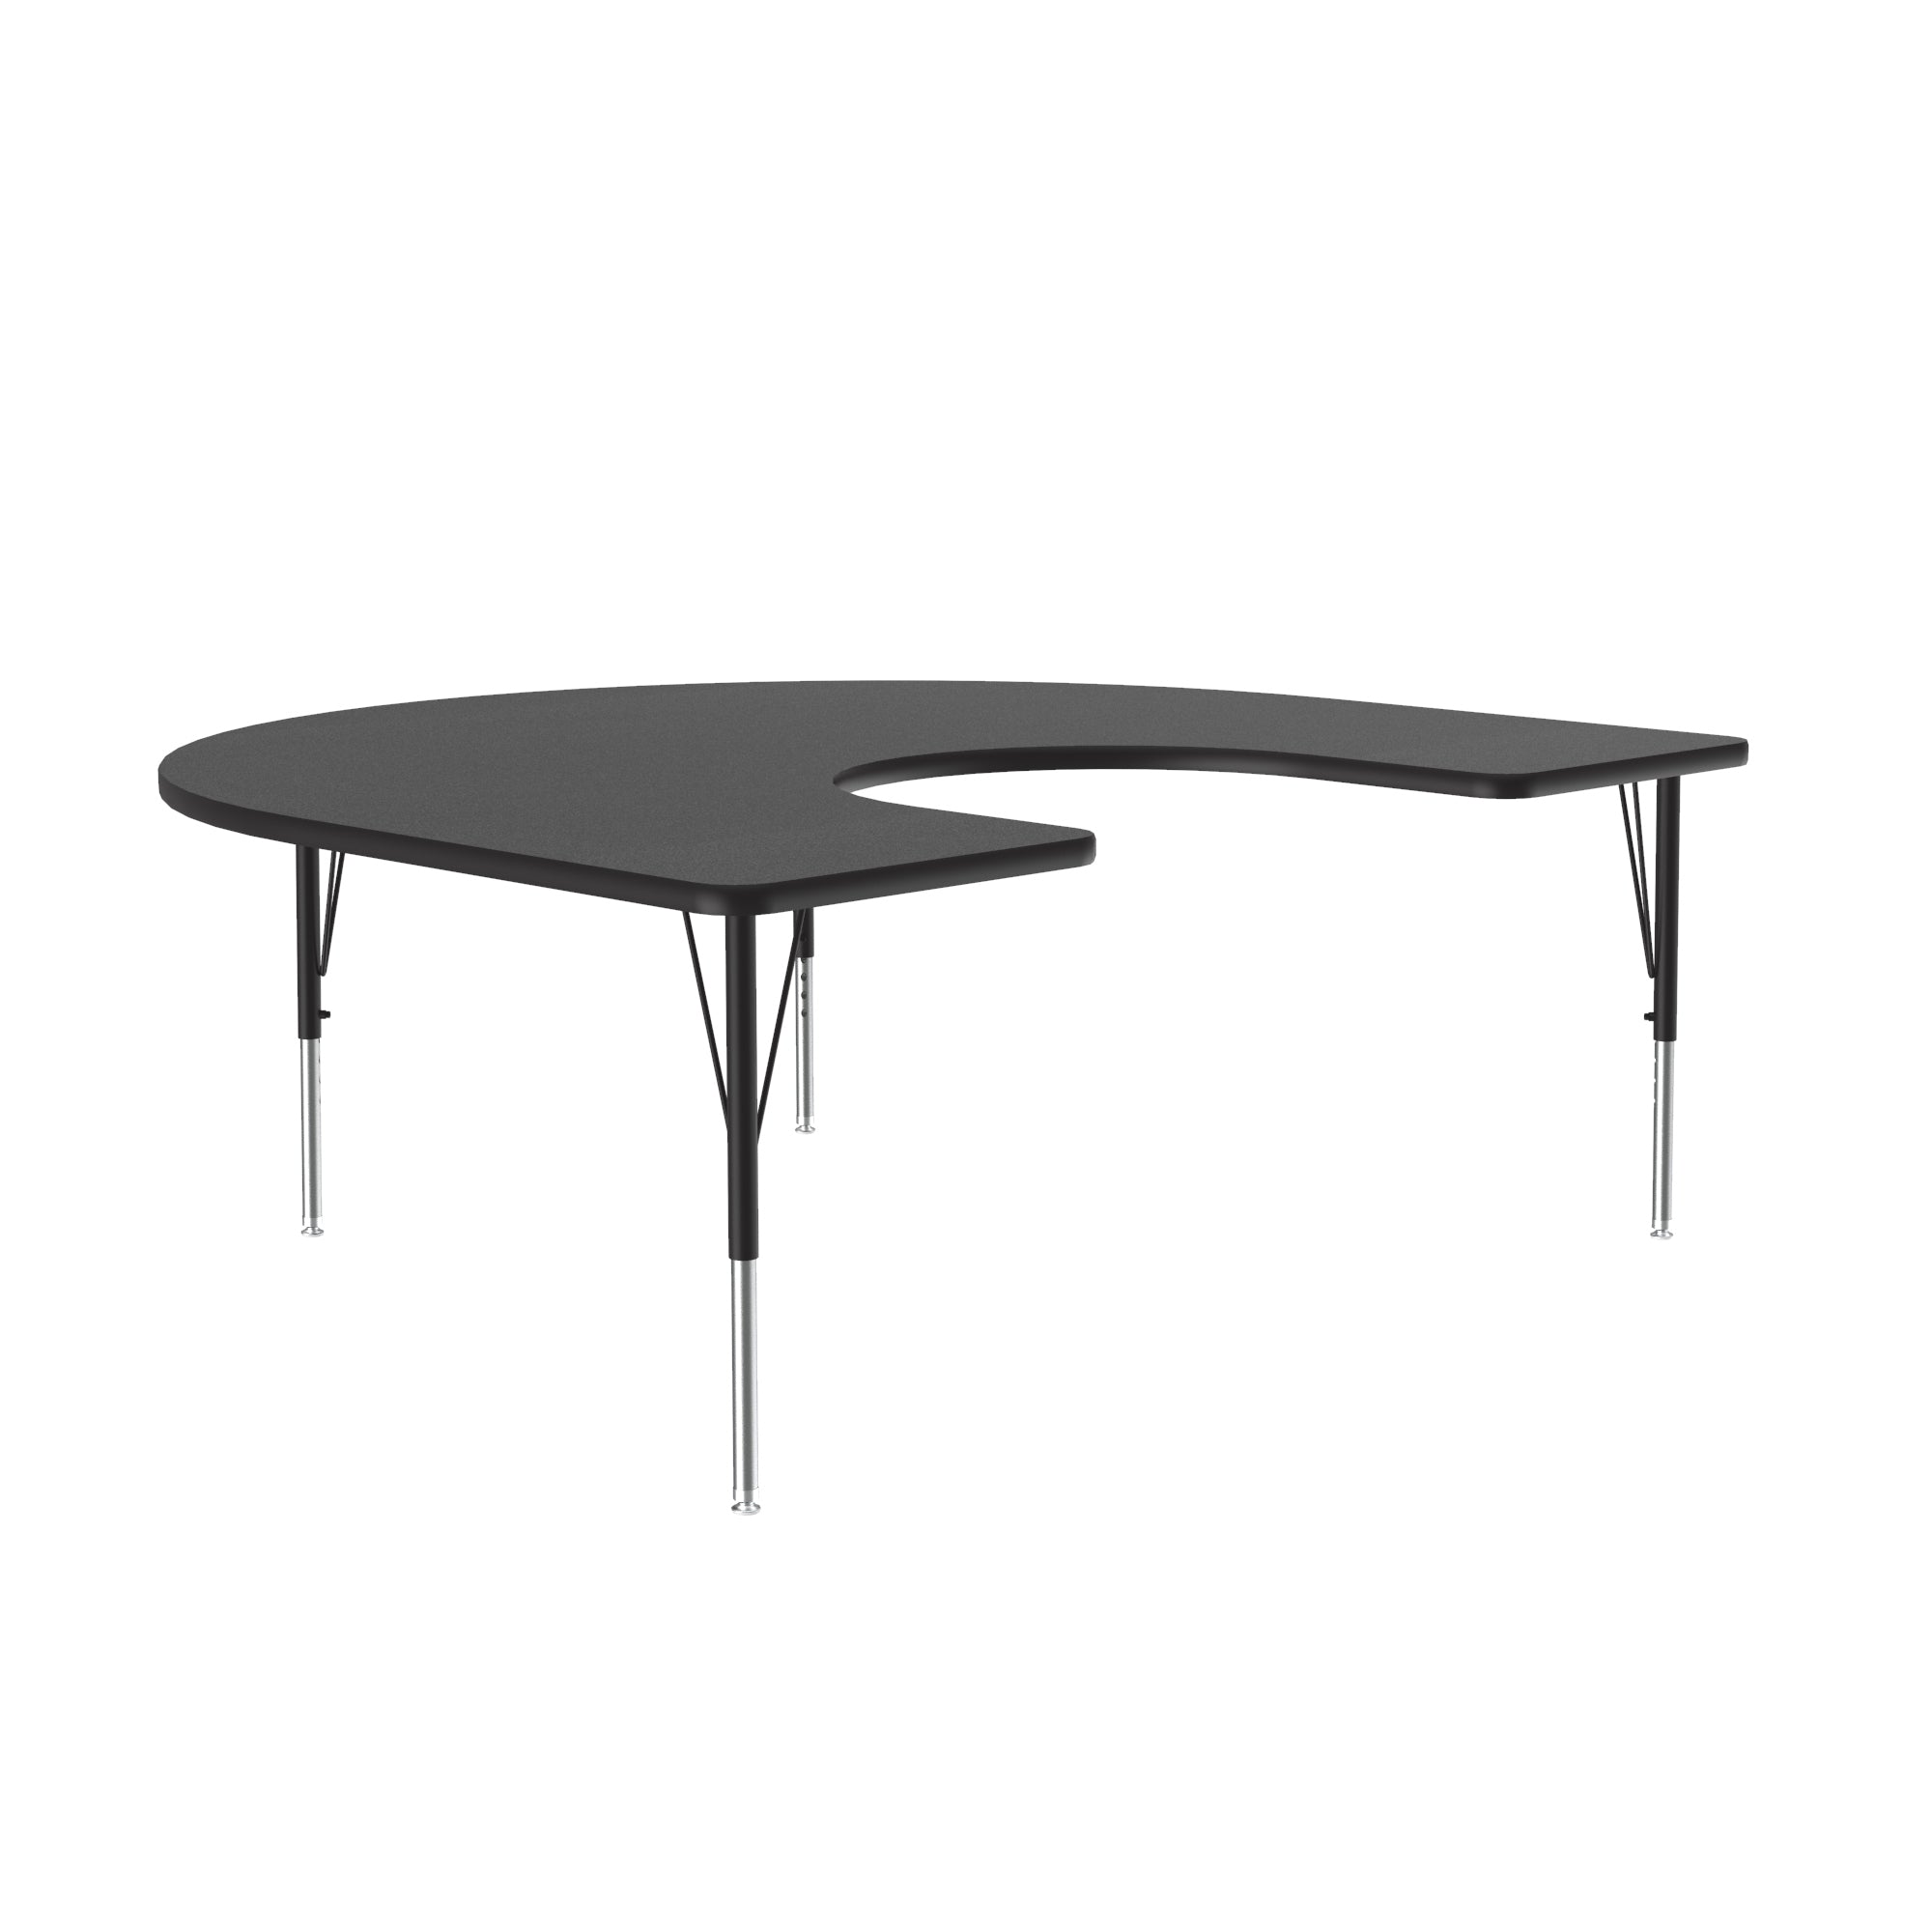 Horseshoe Shape Laminated Top Height Adjusting Folding Table With Meta Legs  and legs